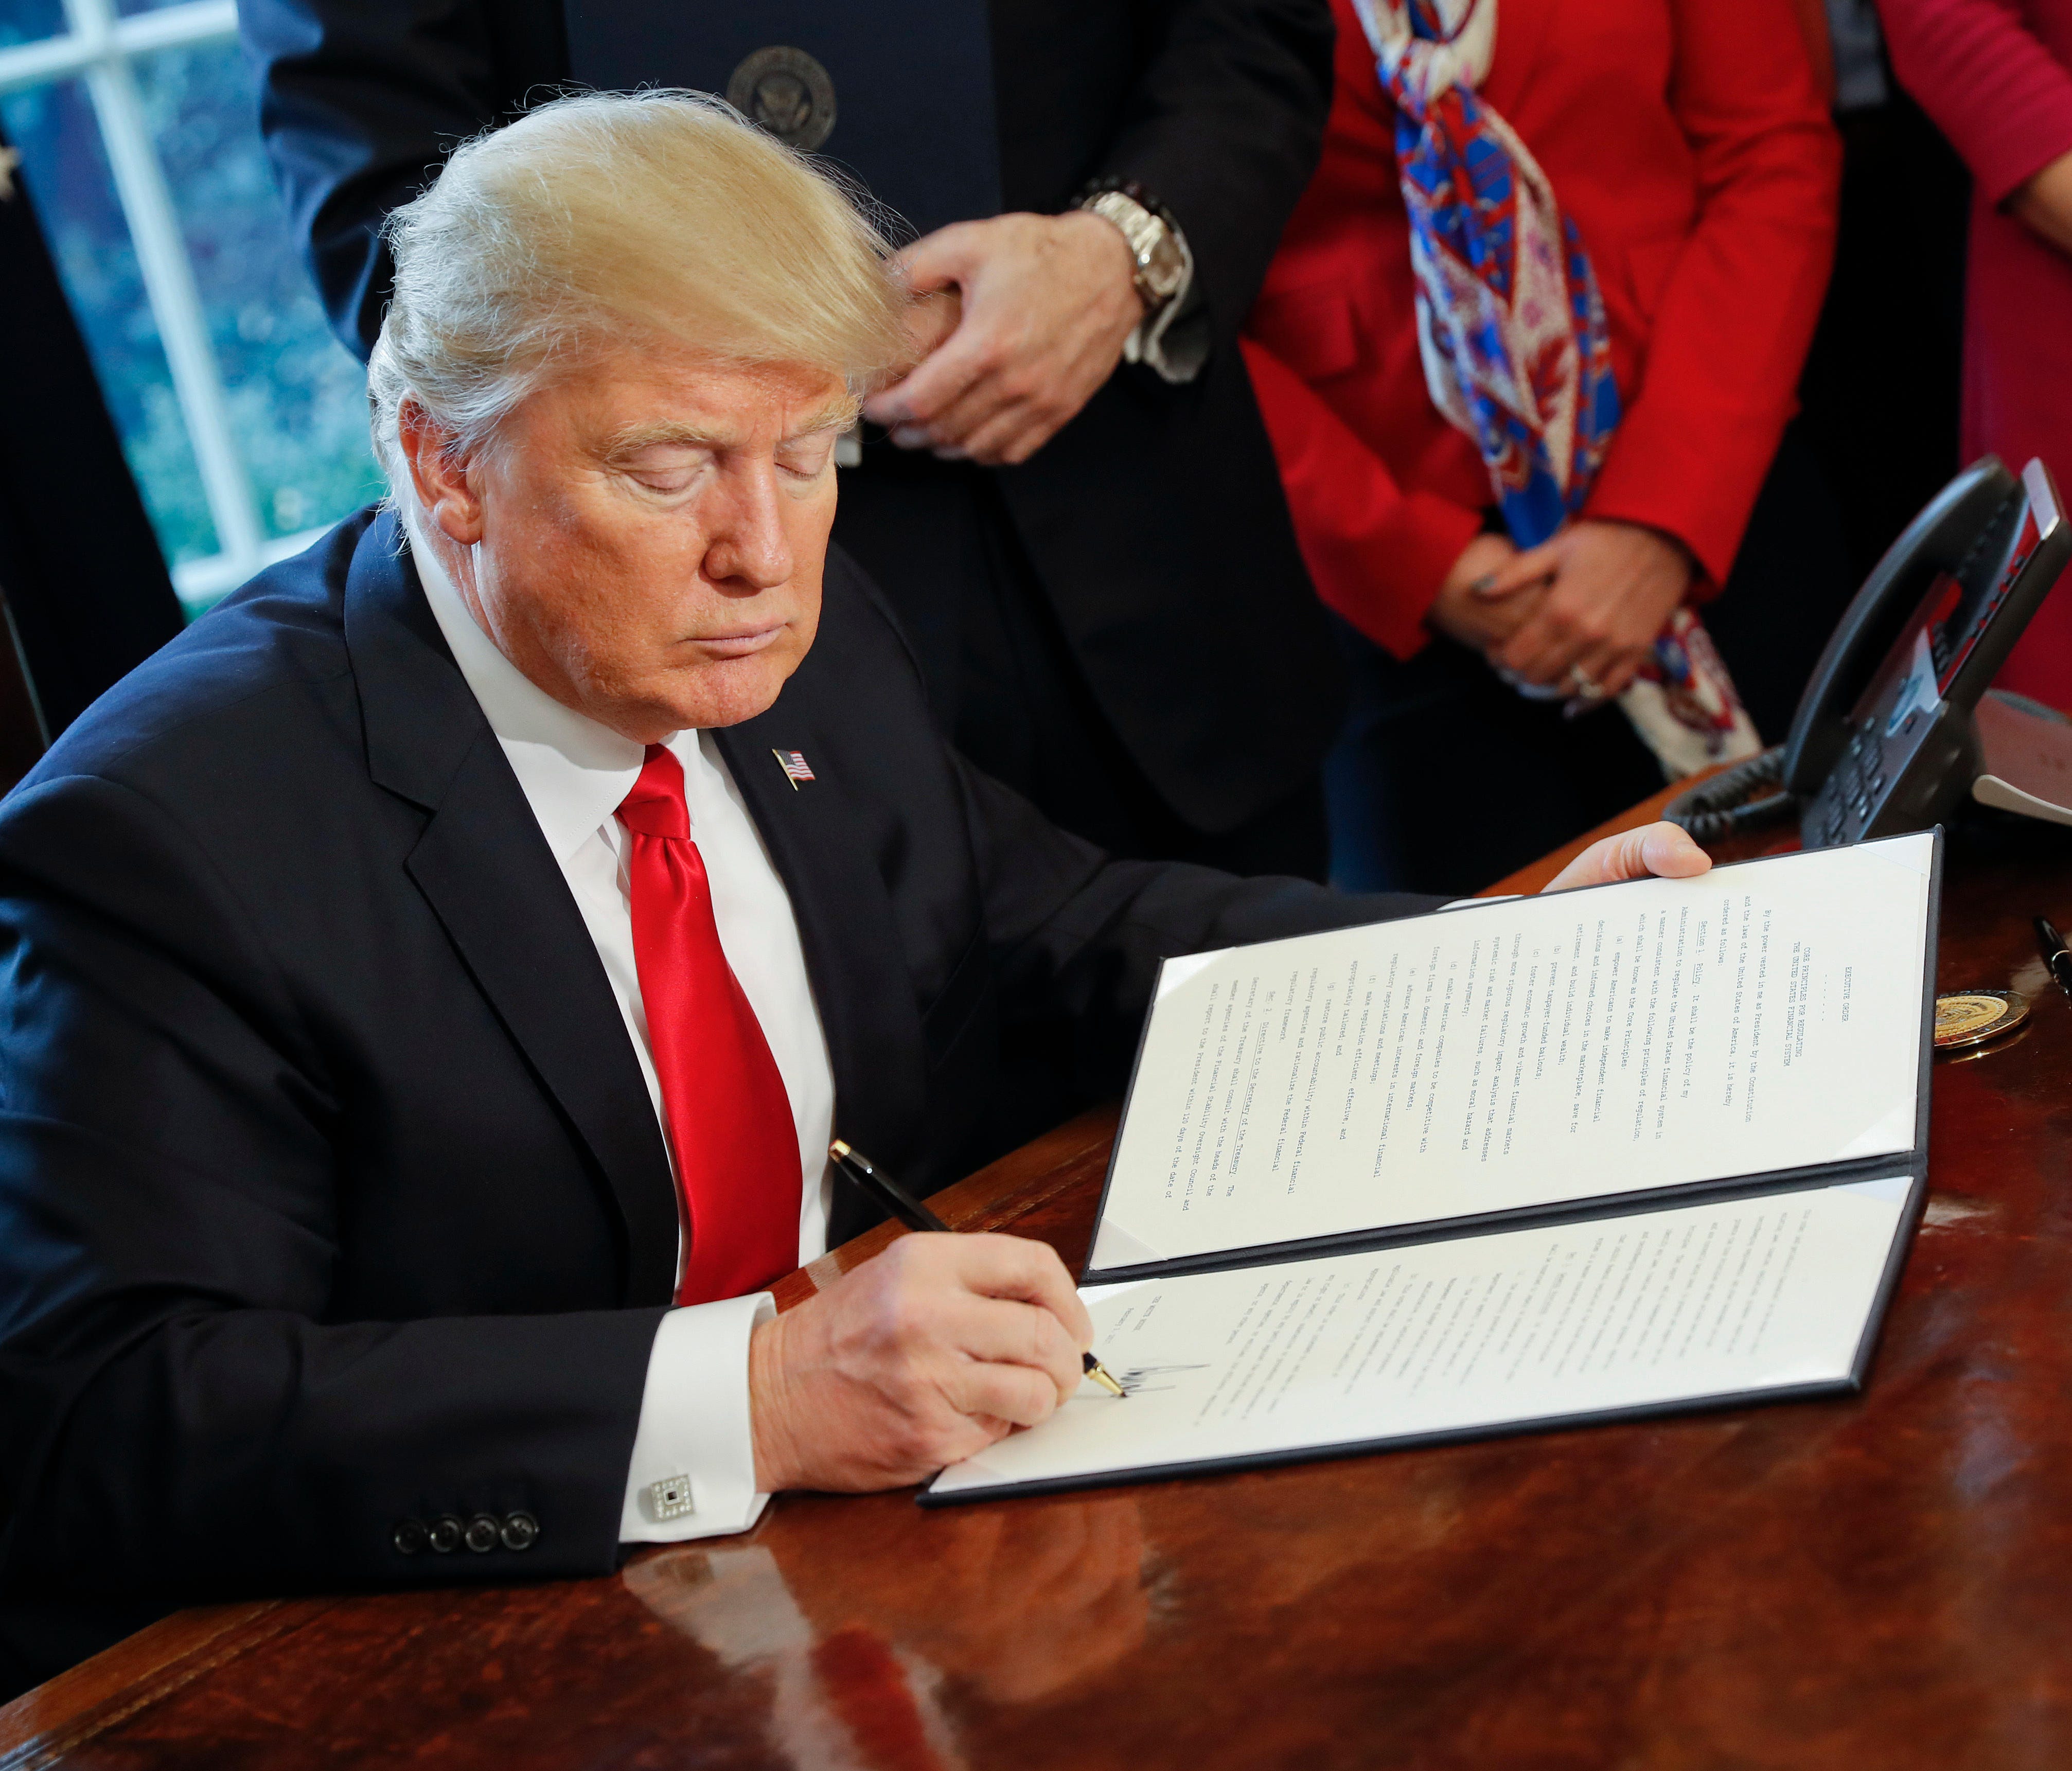 President Trump signs an executive order in the Oval Office on Feb. 3.